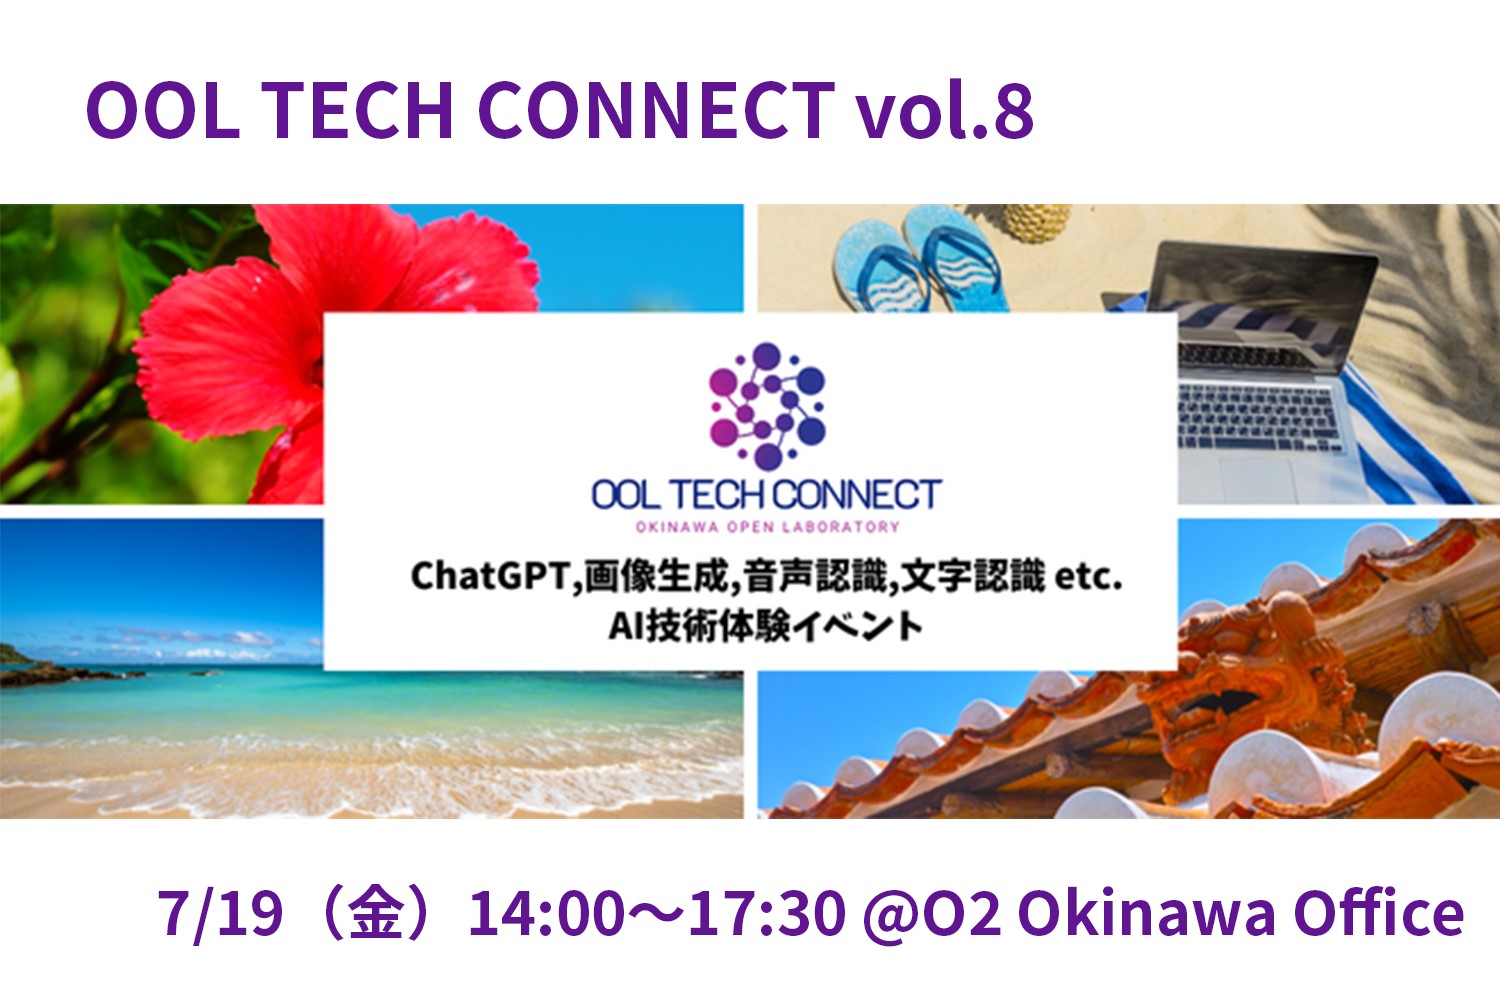 OOL TECH CONNECT vol.8